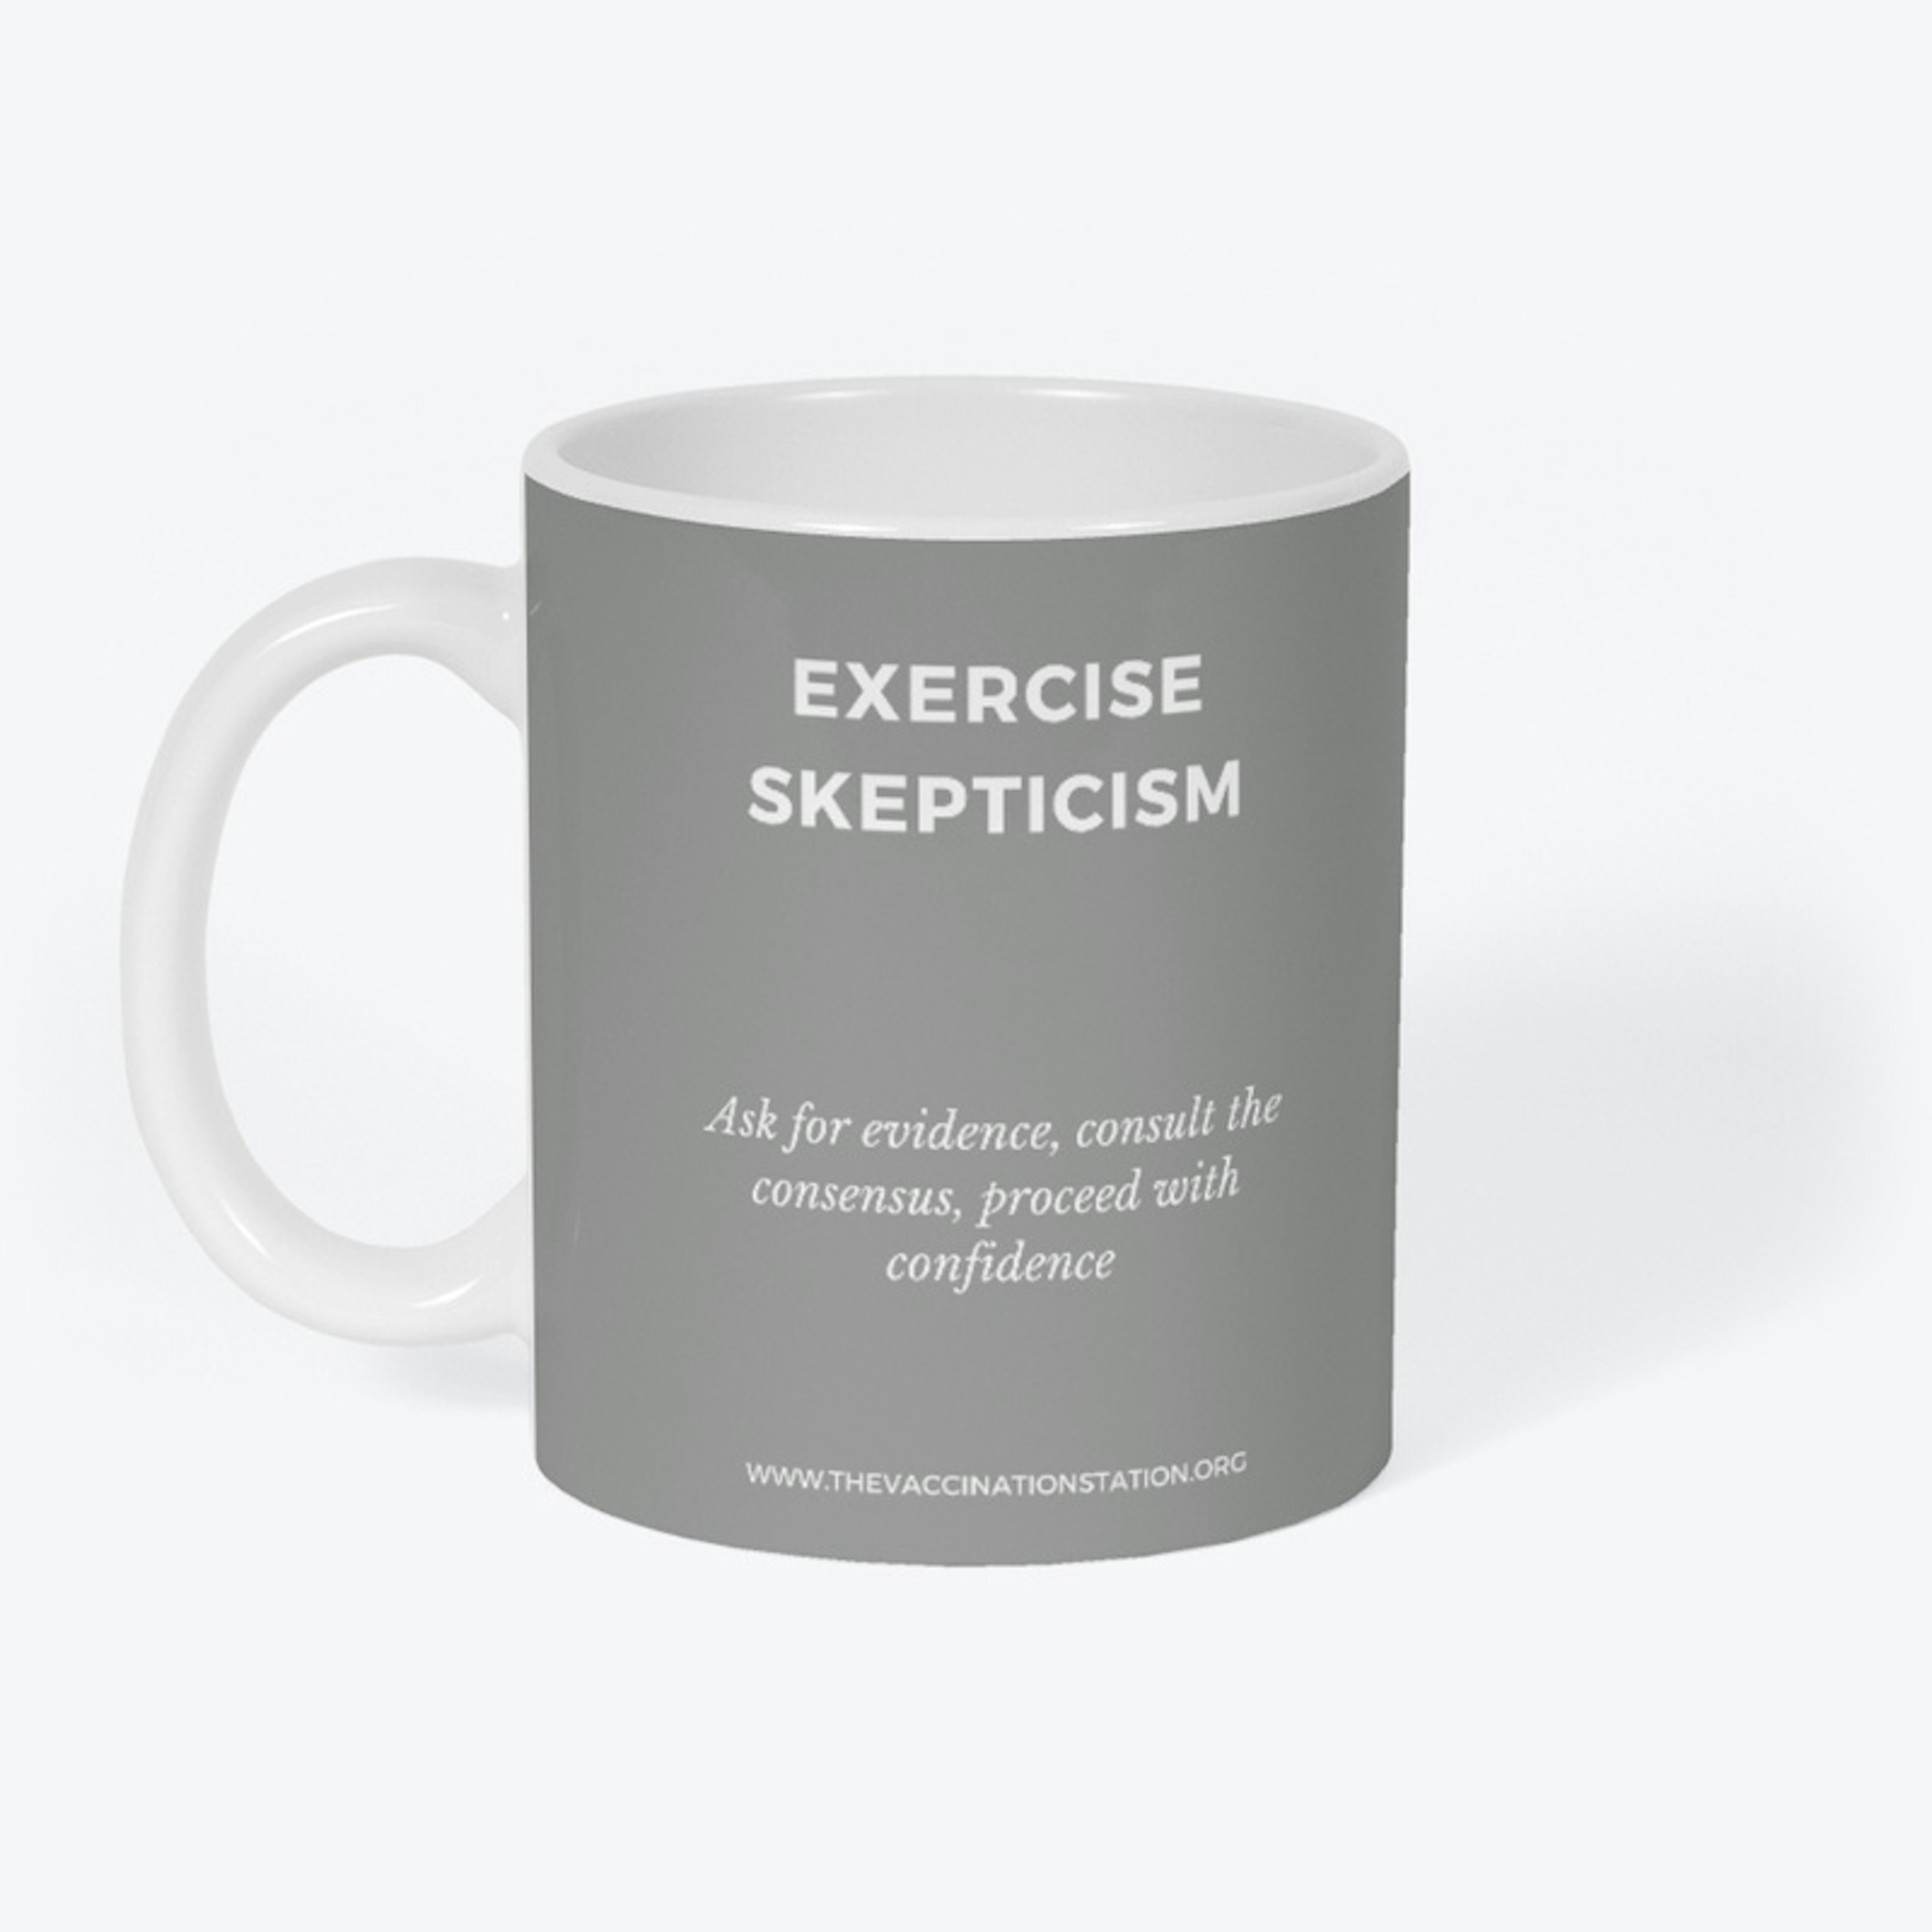 Exercise skepticism